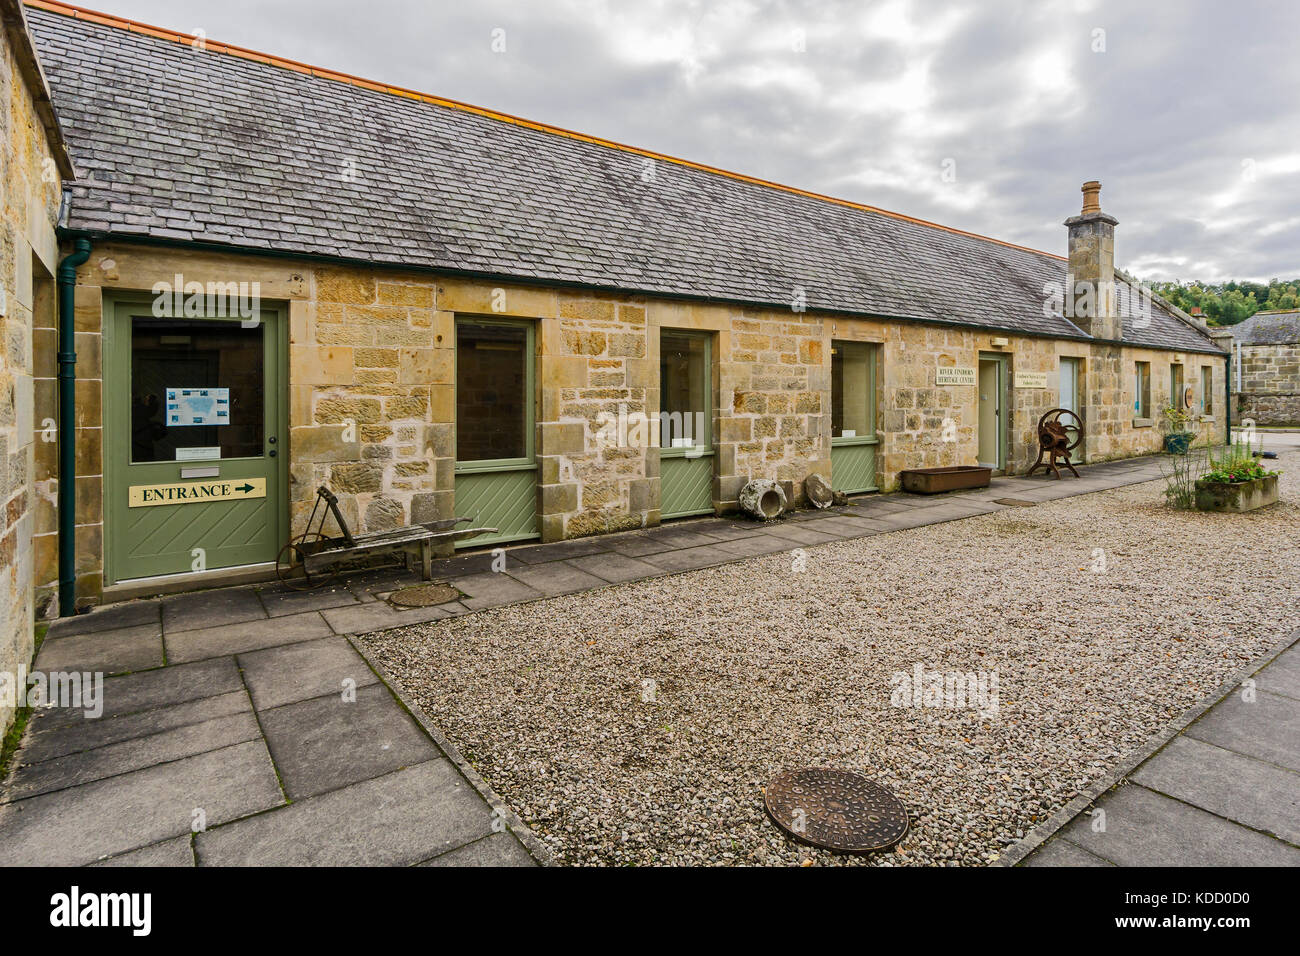 The River Findhorn Heritage Centre at Logie Steading visitor centre arts & crafts shops off A940 south of Forres in Morayshire Scotland UK Stock Photo